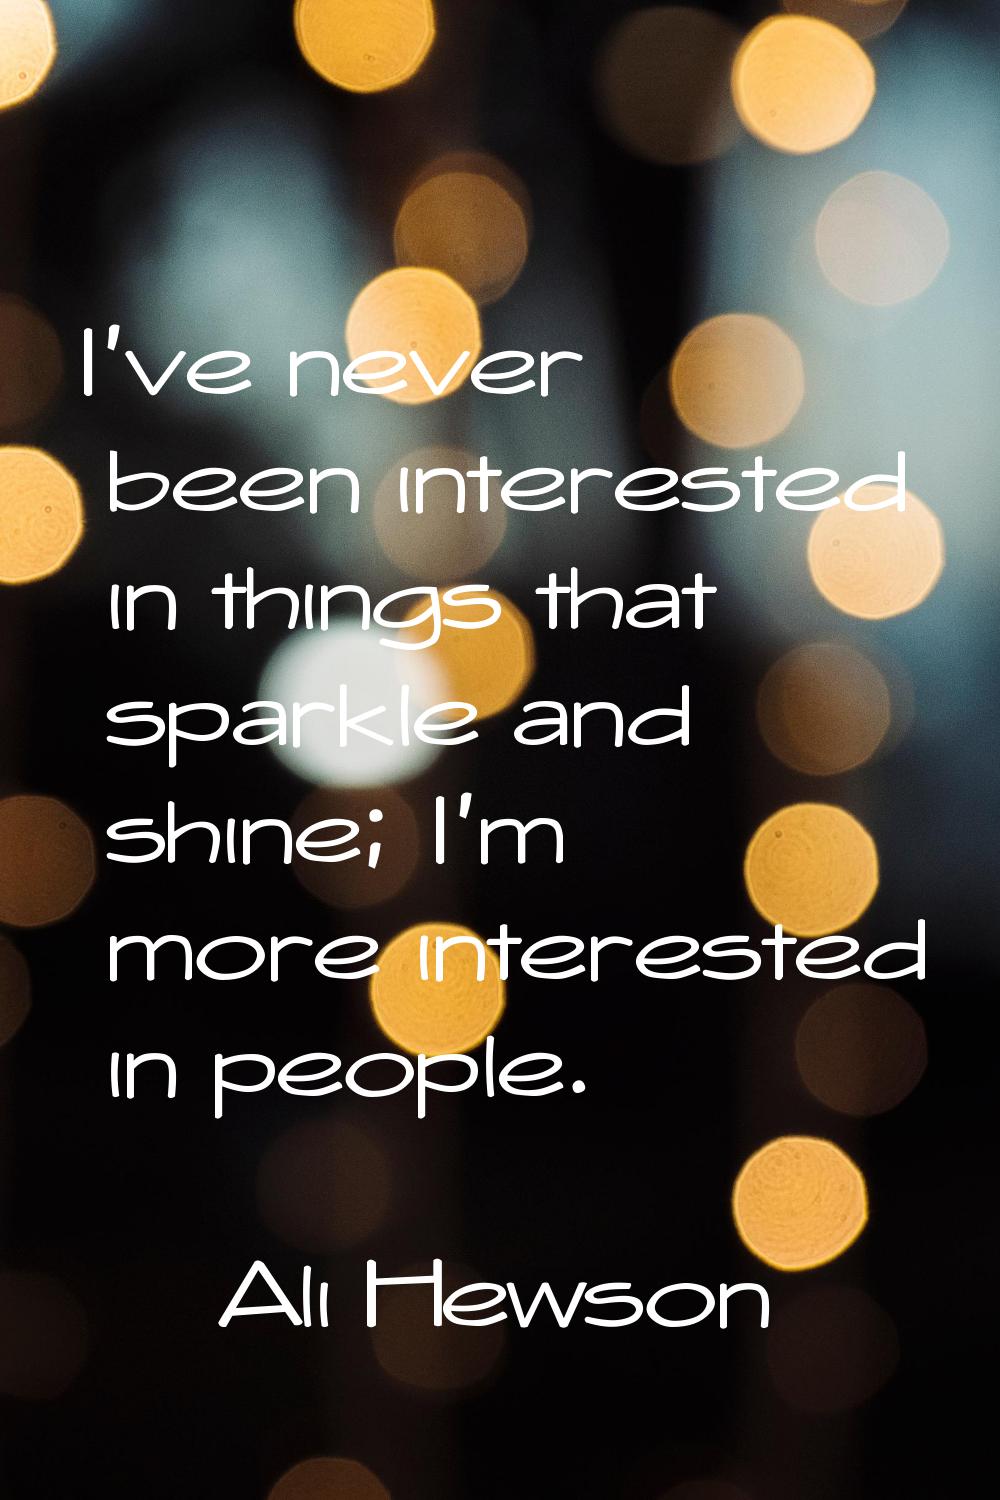 I've never been interested in things that sparkle and shine; I'm more interested in people.